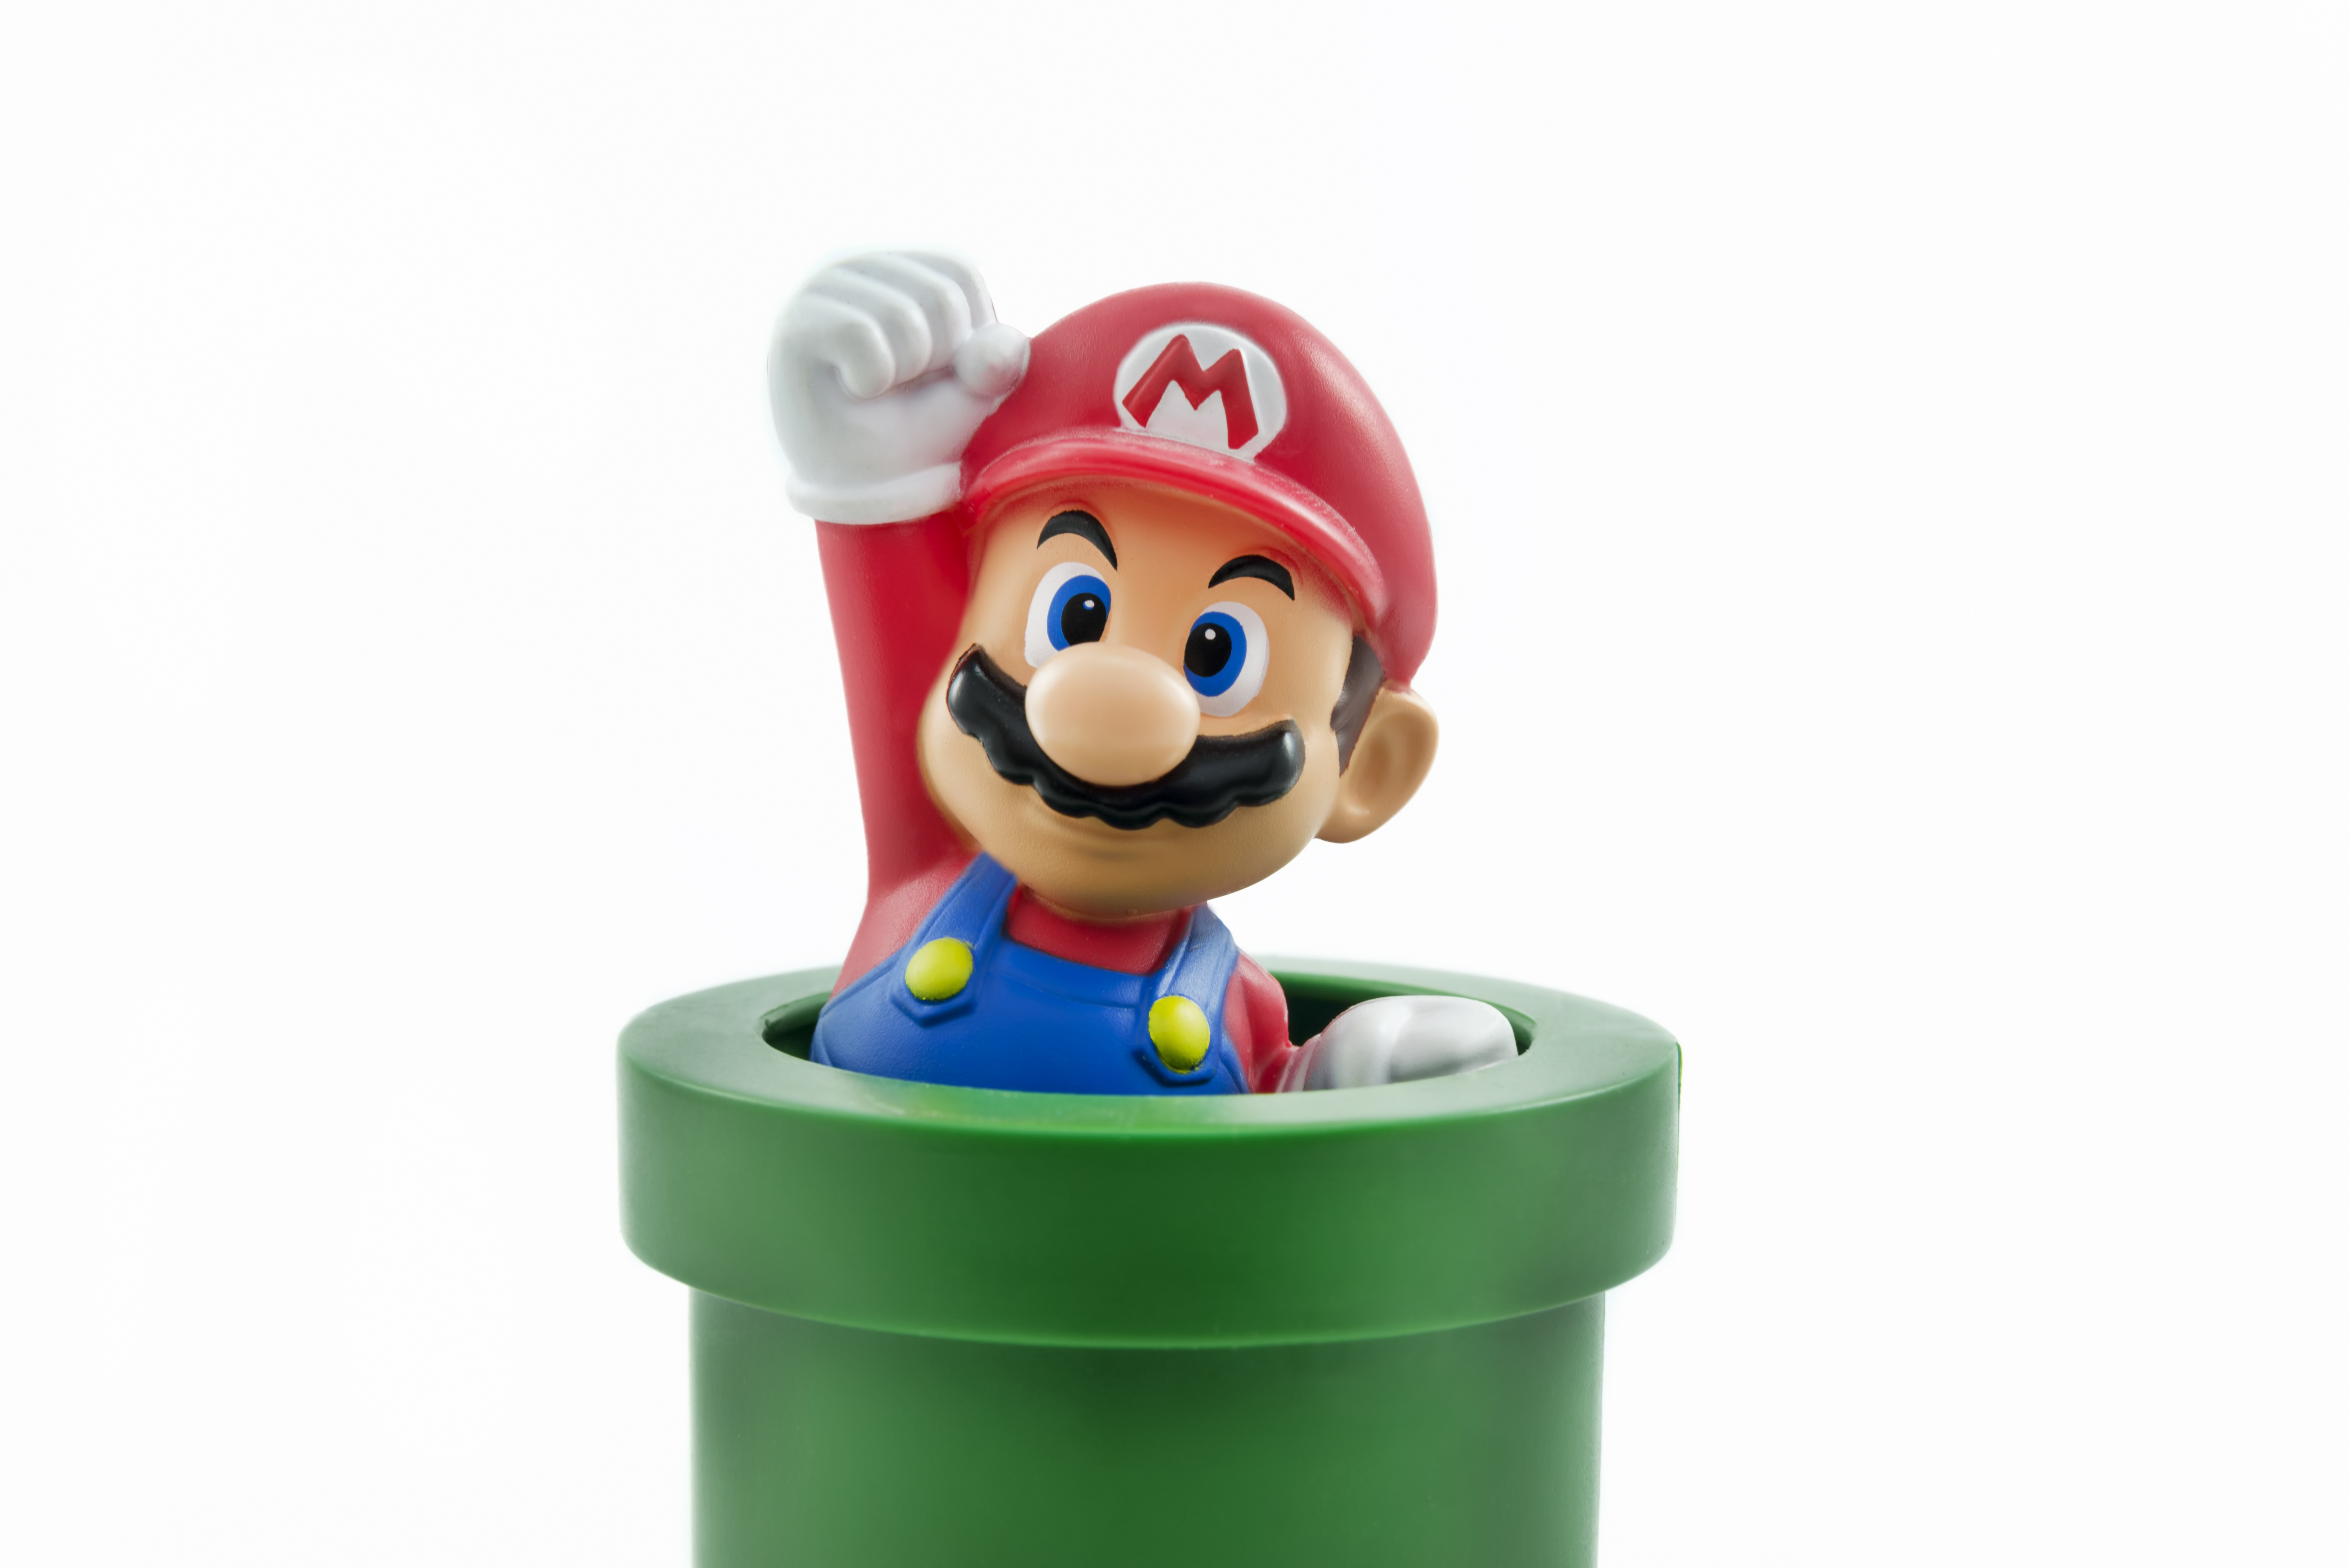 Super Mario jumping out of a tube